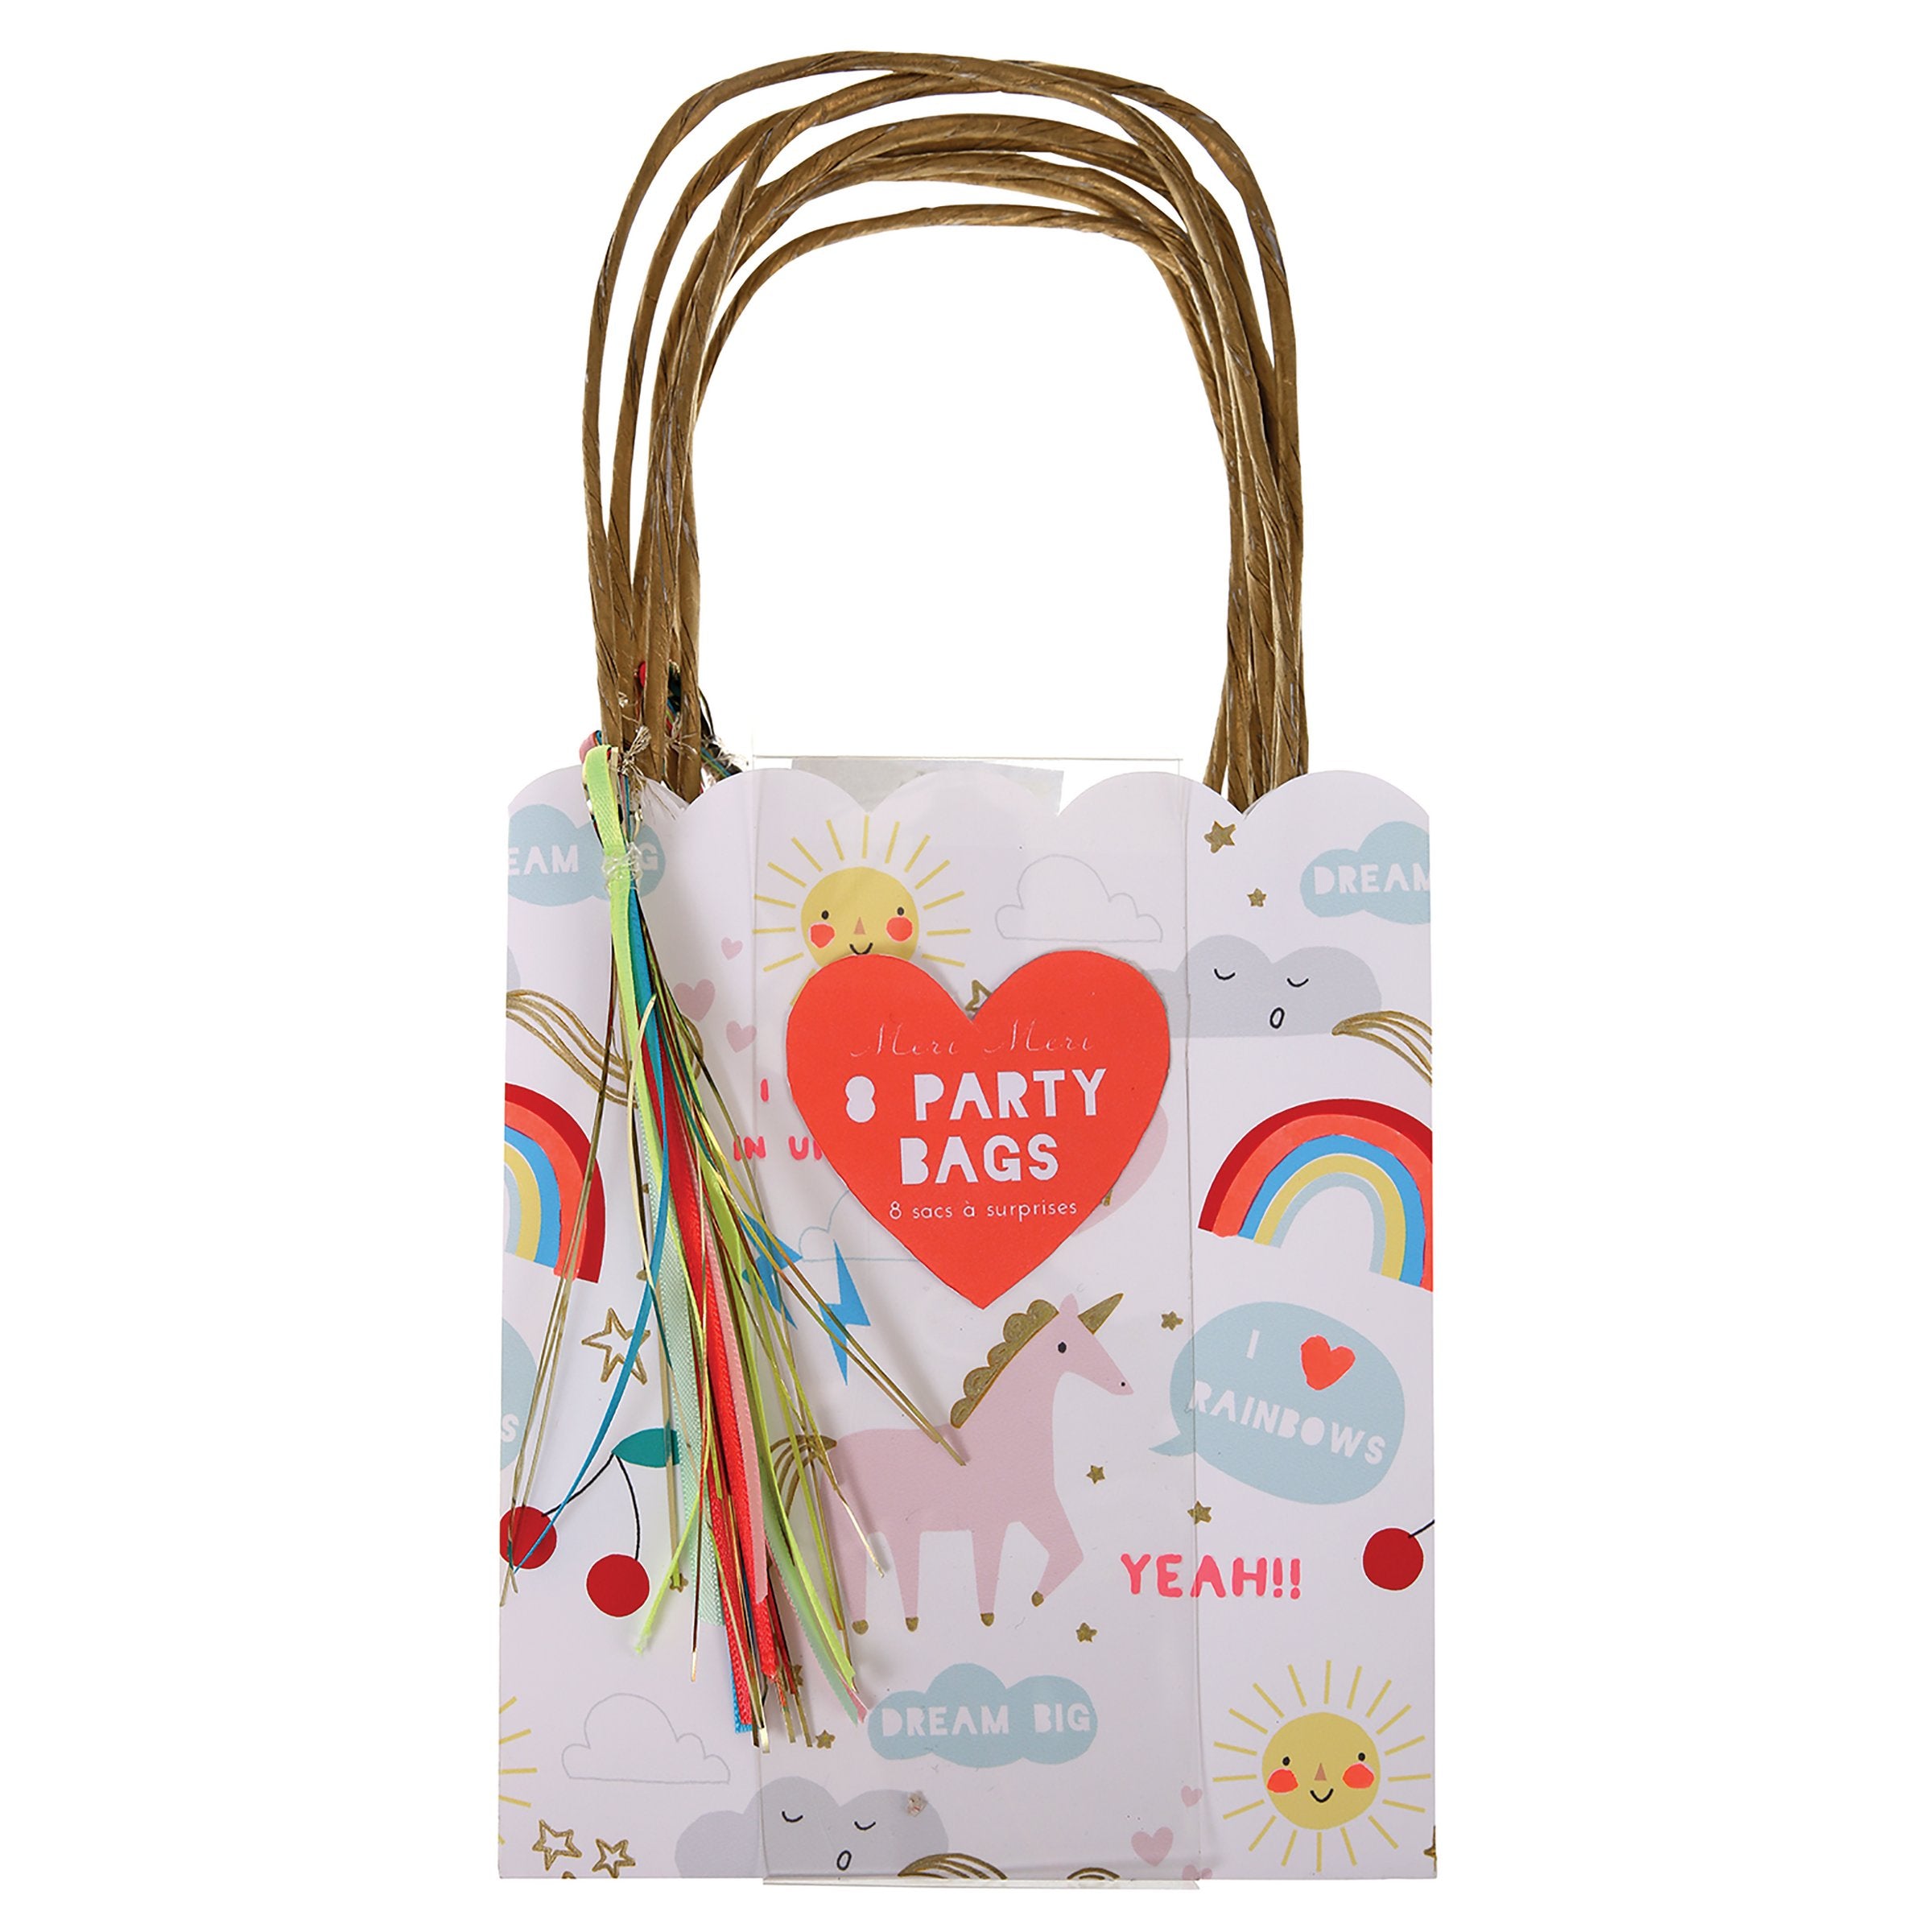 These beautiful unicorn party bags have gold paper handles, gold foil detail and delightful ribbons.